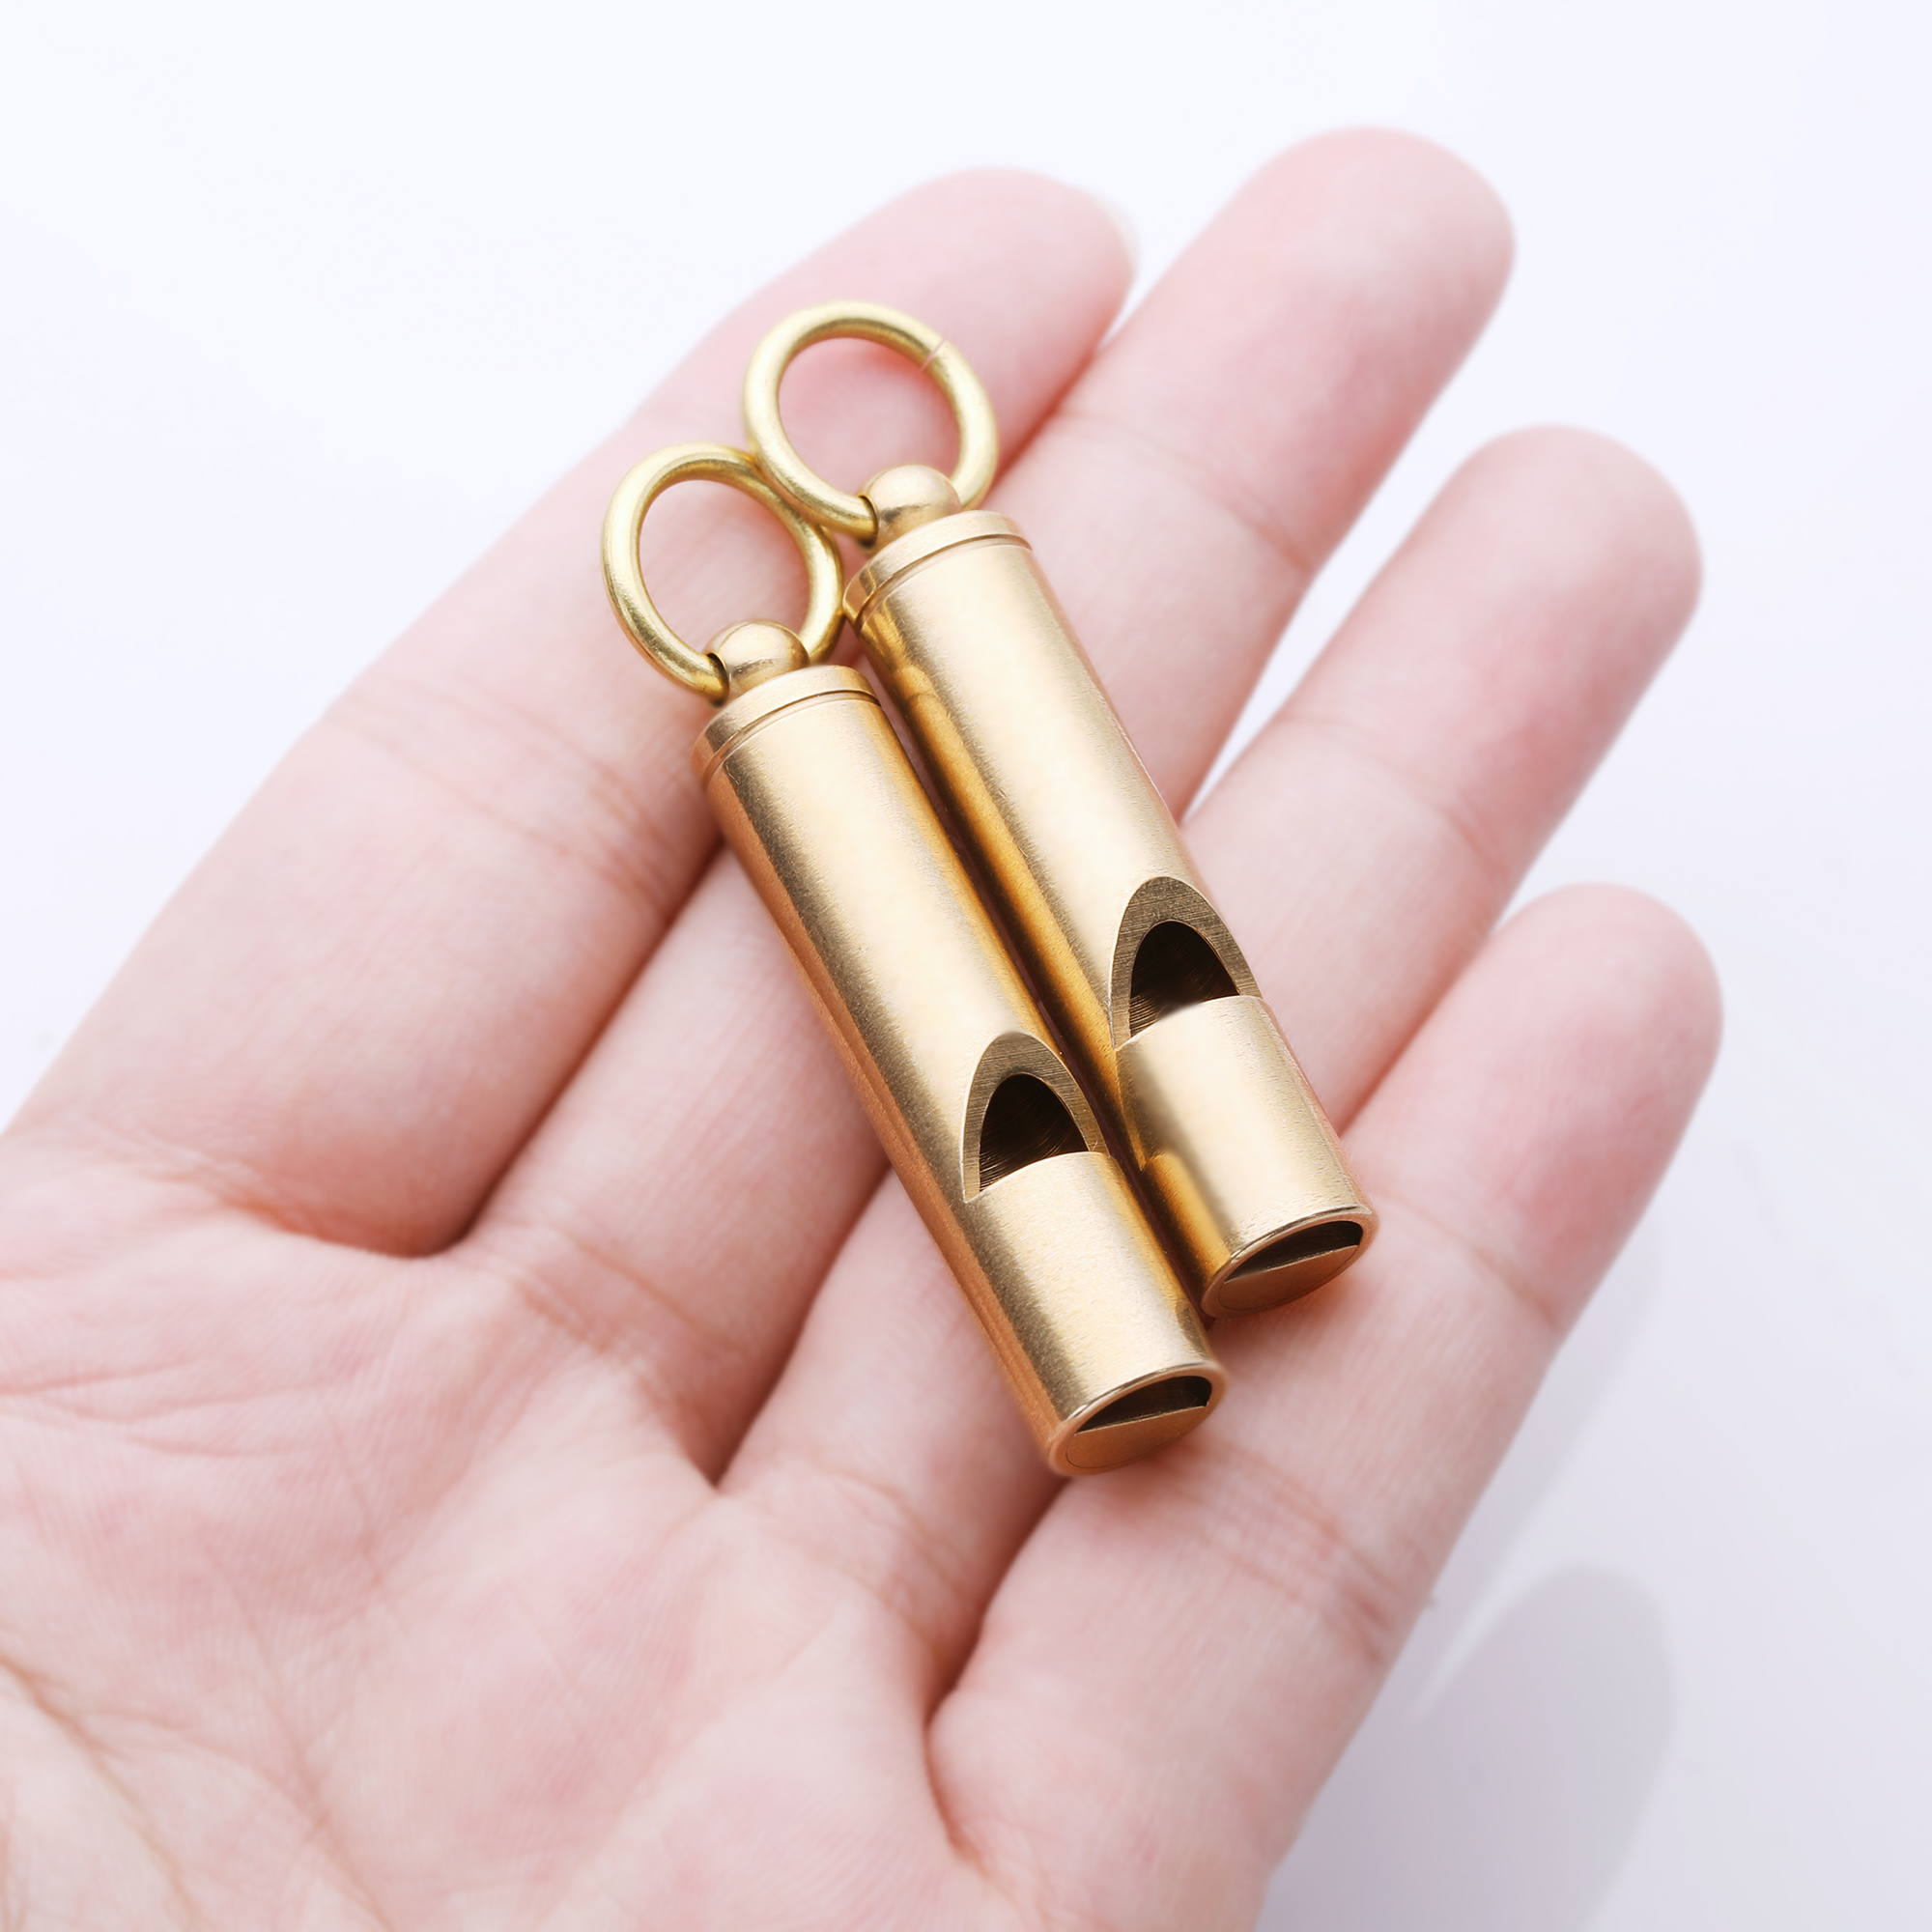 1Pcs 10x47MM Raw Brass Whistle,Brass Whistle Keychain Pendant,Emergency Whistle,Outdoor Survival Whistle 1800574 - Click Image to Close